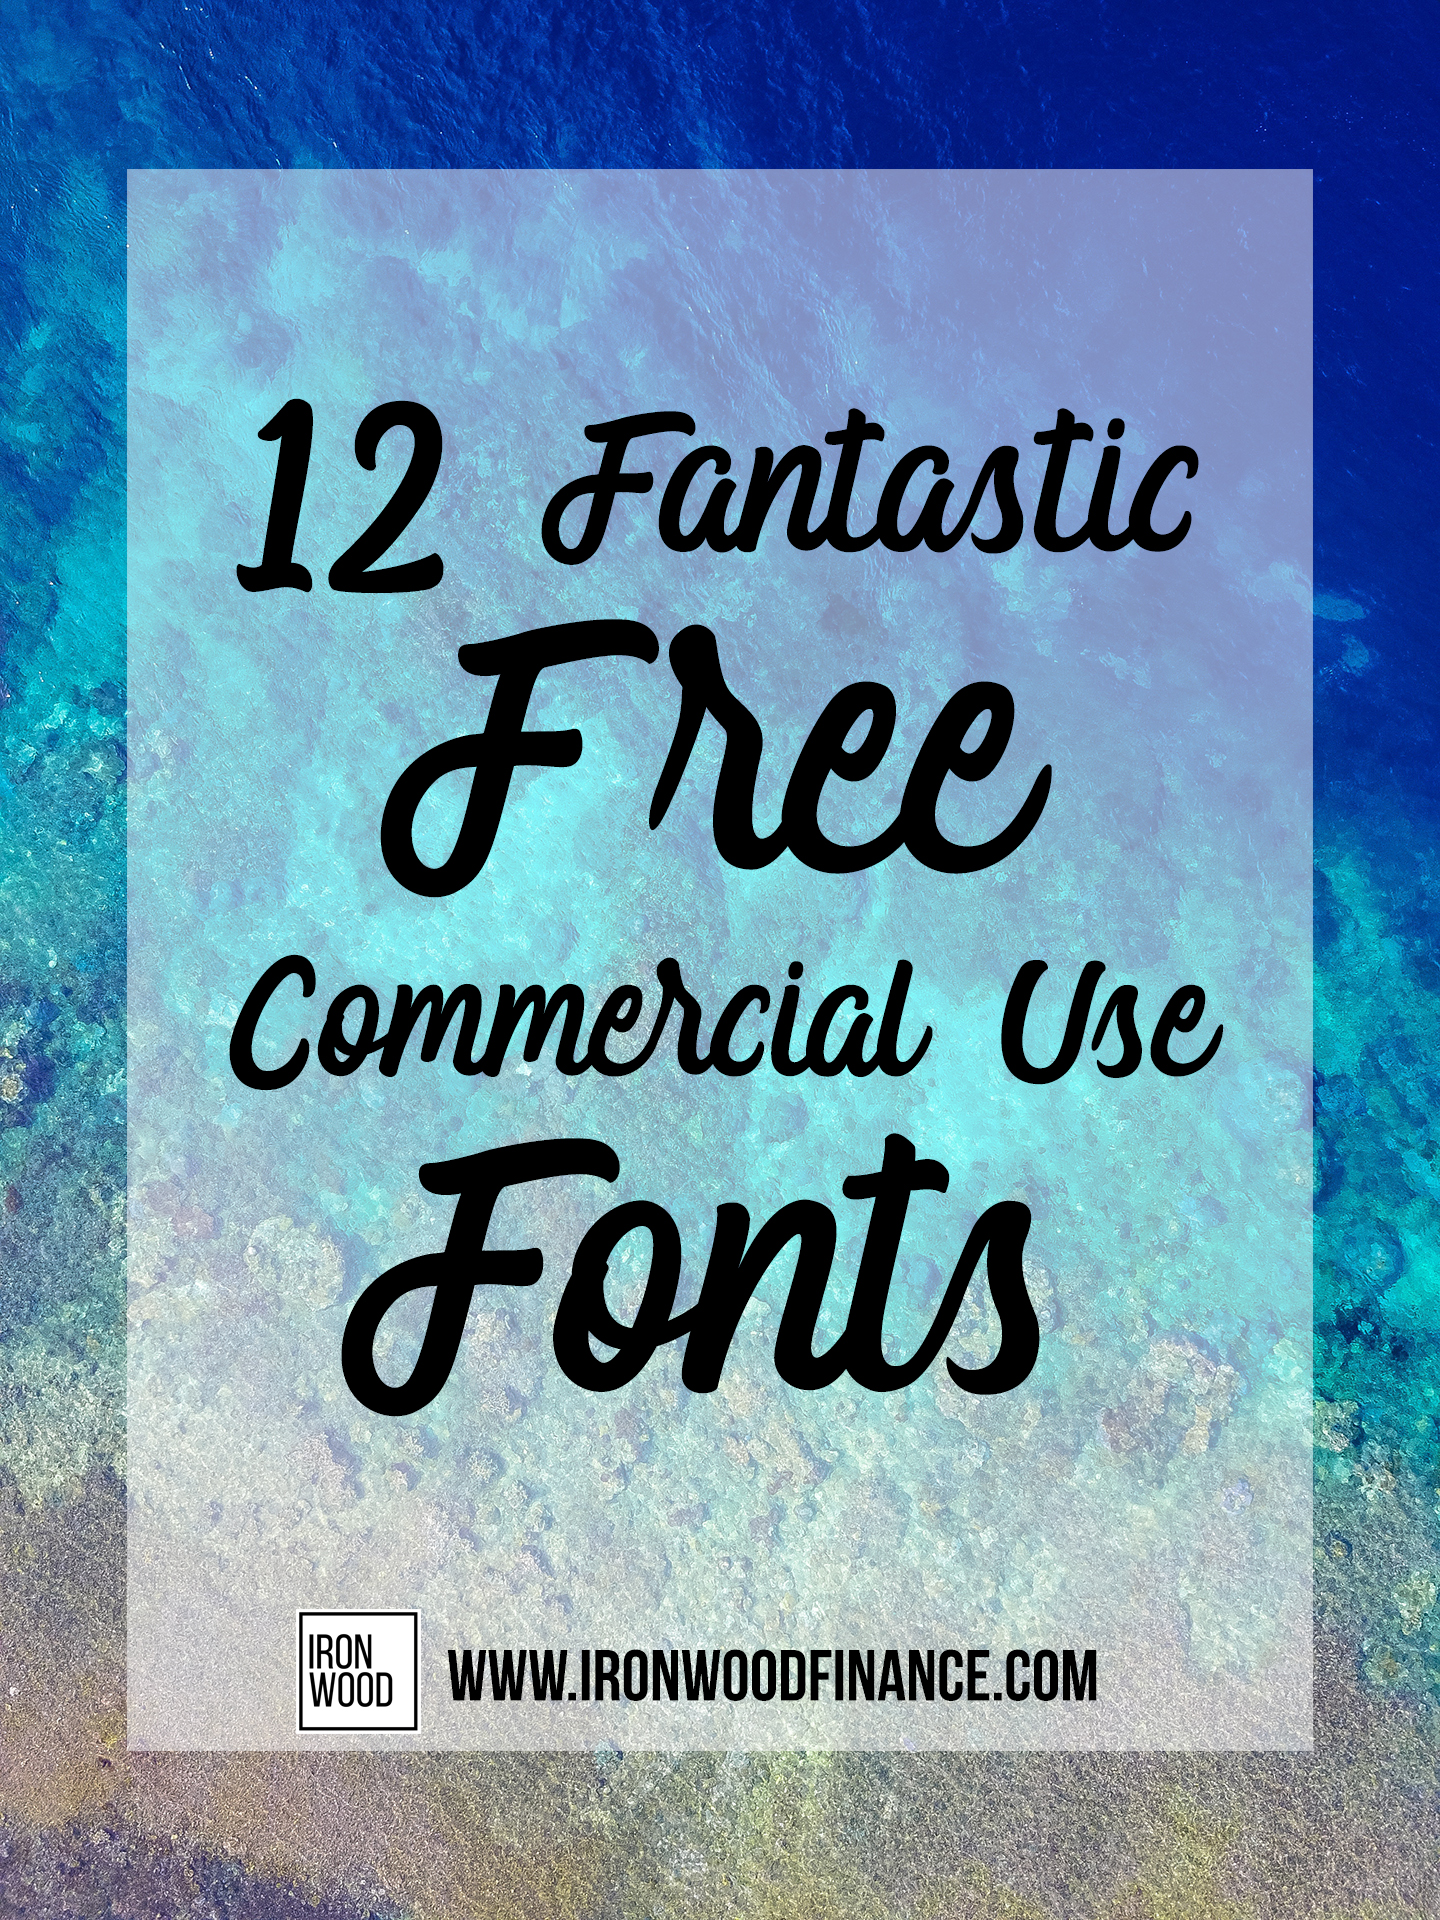 free commercial use fonts, ironwood, finance, lending, funding, small business, fonts